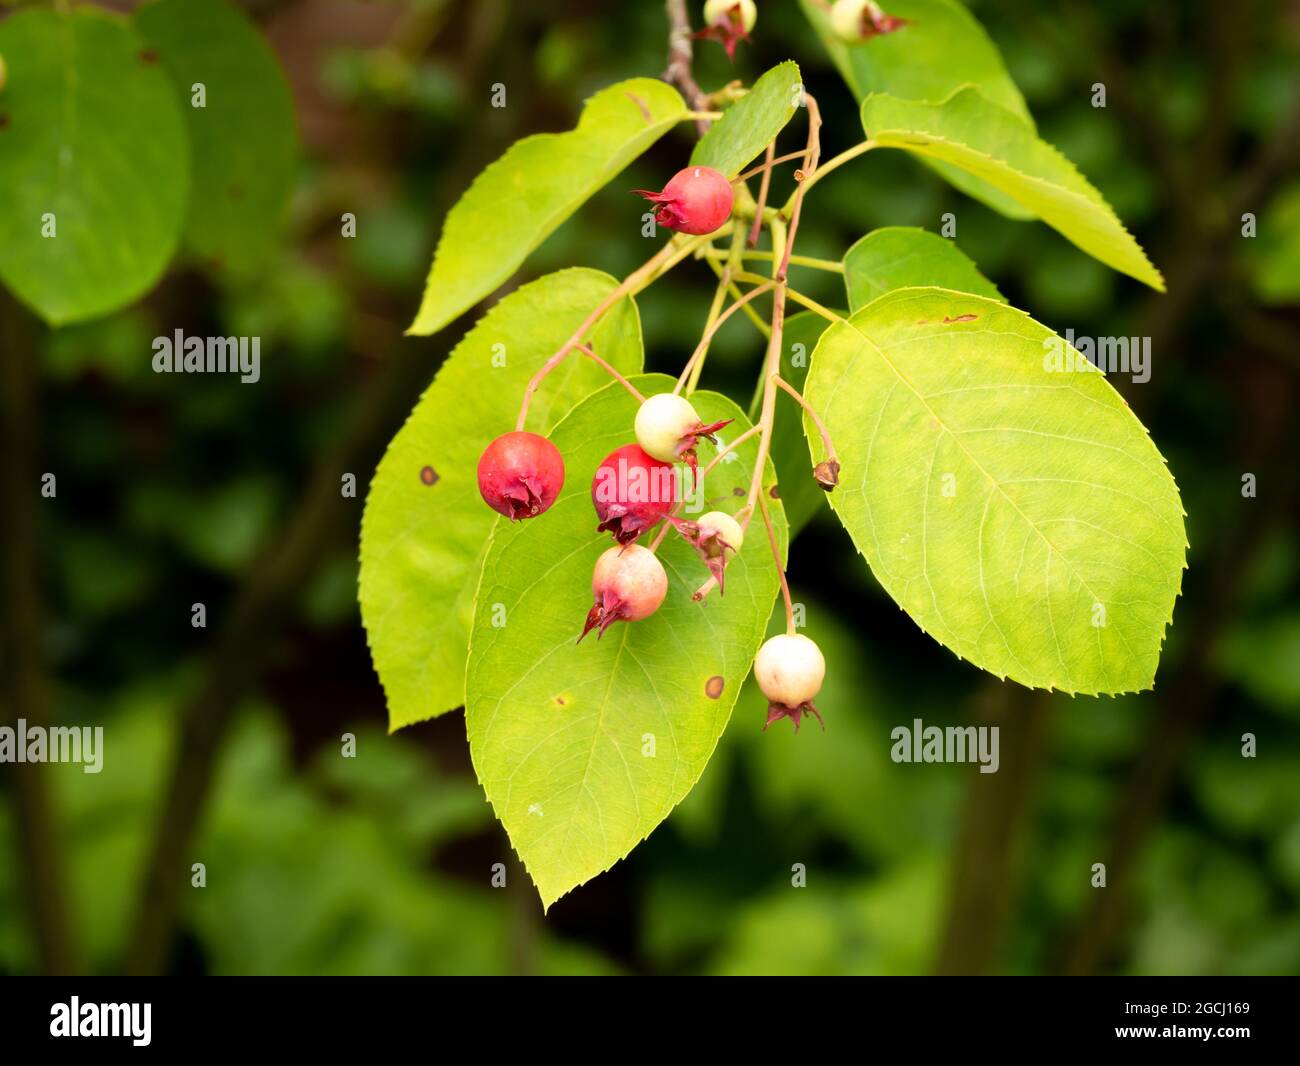 Juneberry or snowy mespilus, Amelanchier lamarkii, close up of small tree with red and white berries and green leaves, Netherlands Stock Photo